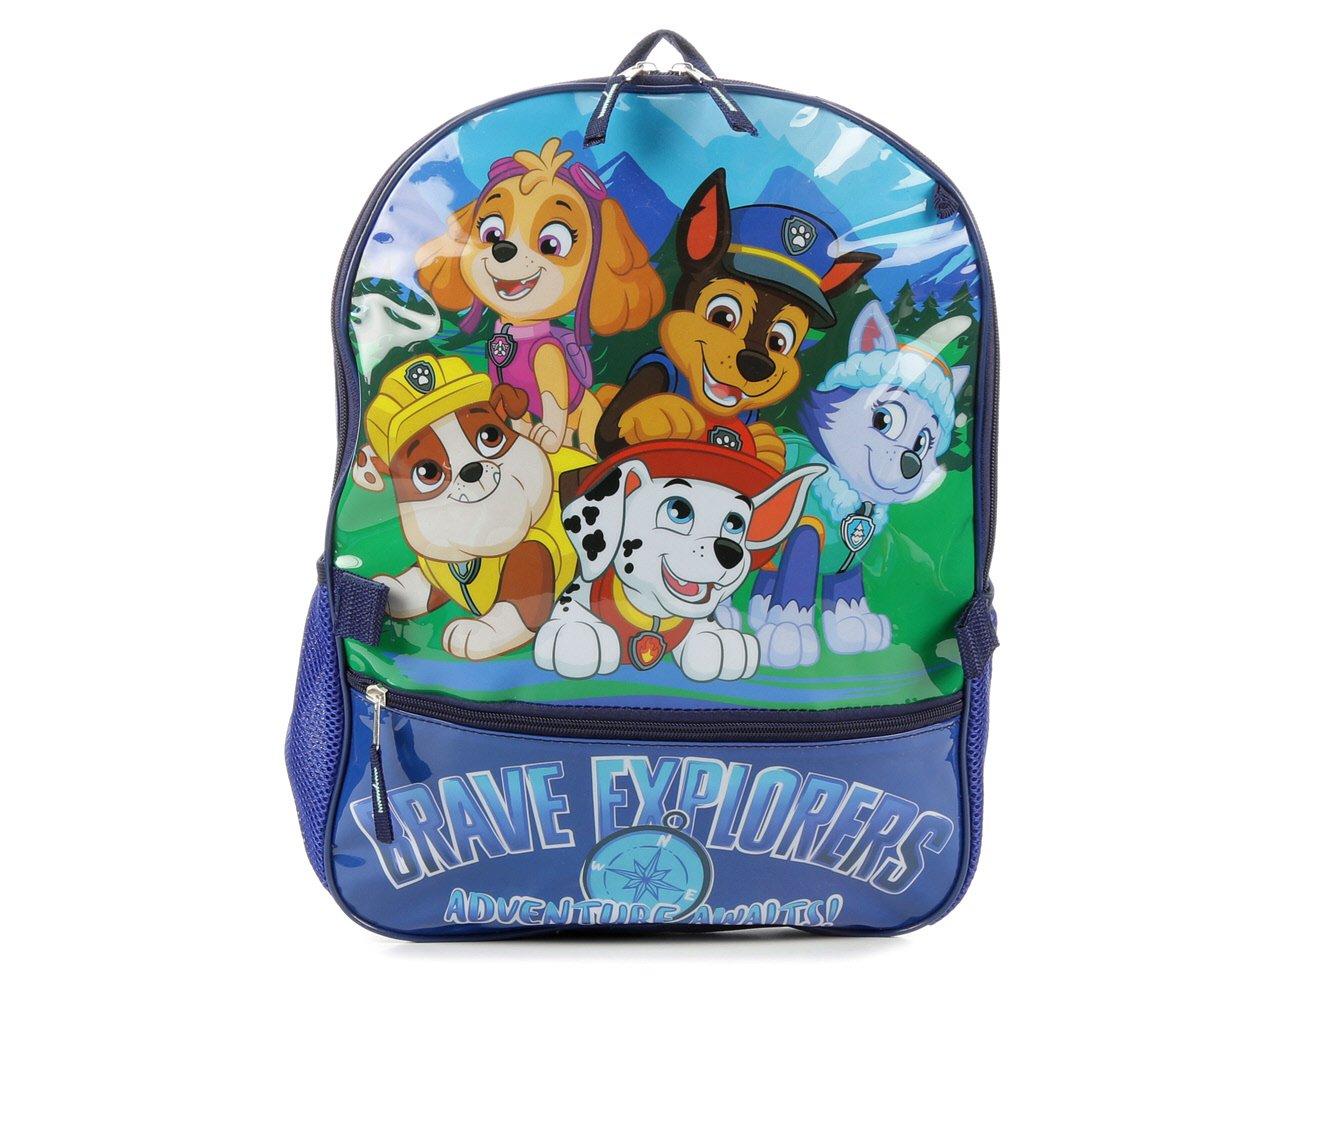 Accessory Innovations 5 Piece Kids Licensed Backpack Set Paw